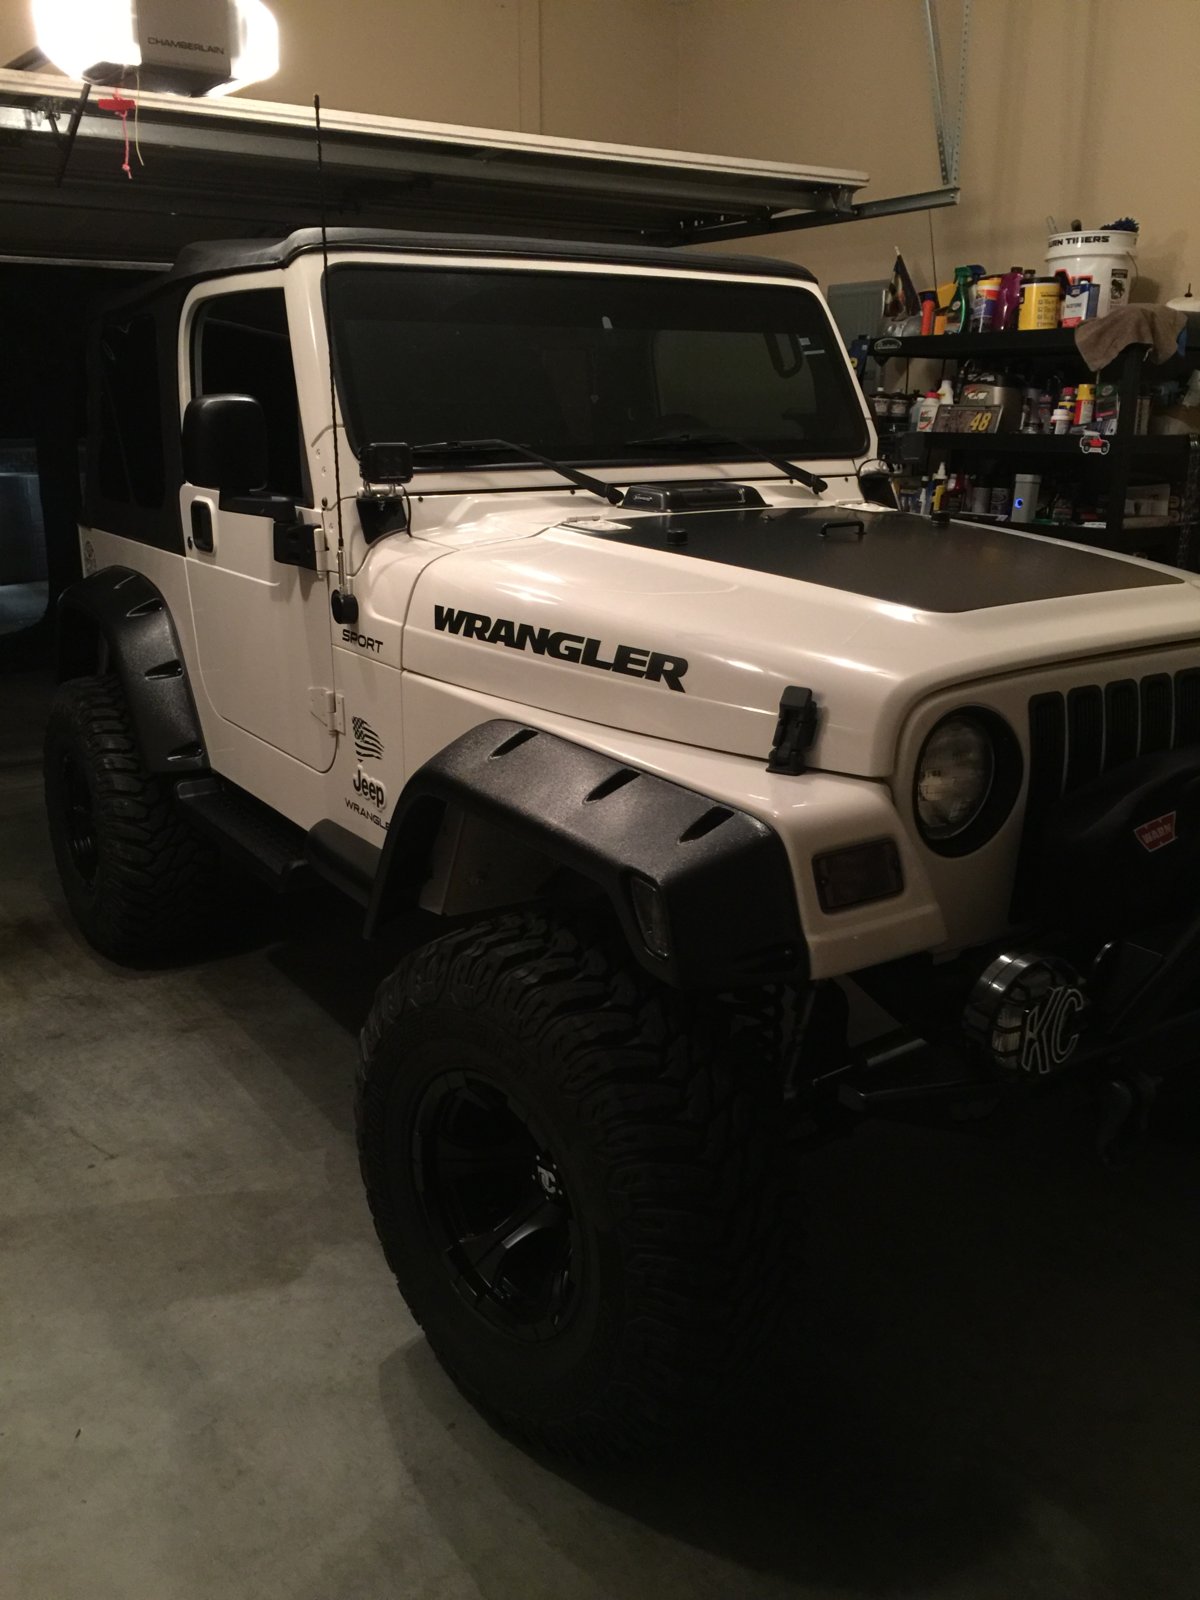 Jeep names: What are your names and how did you decide? | Jeep Wrangler TJ  Forum